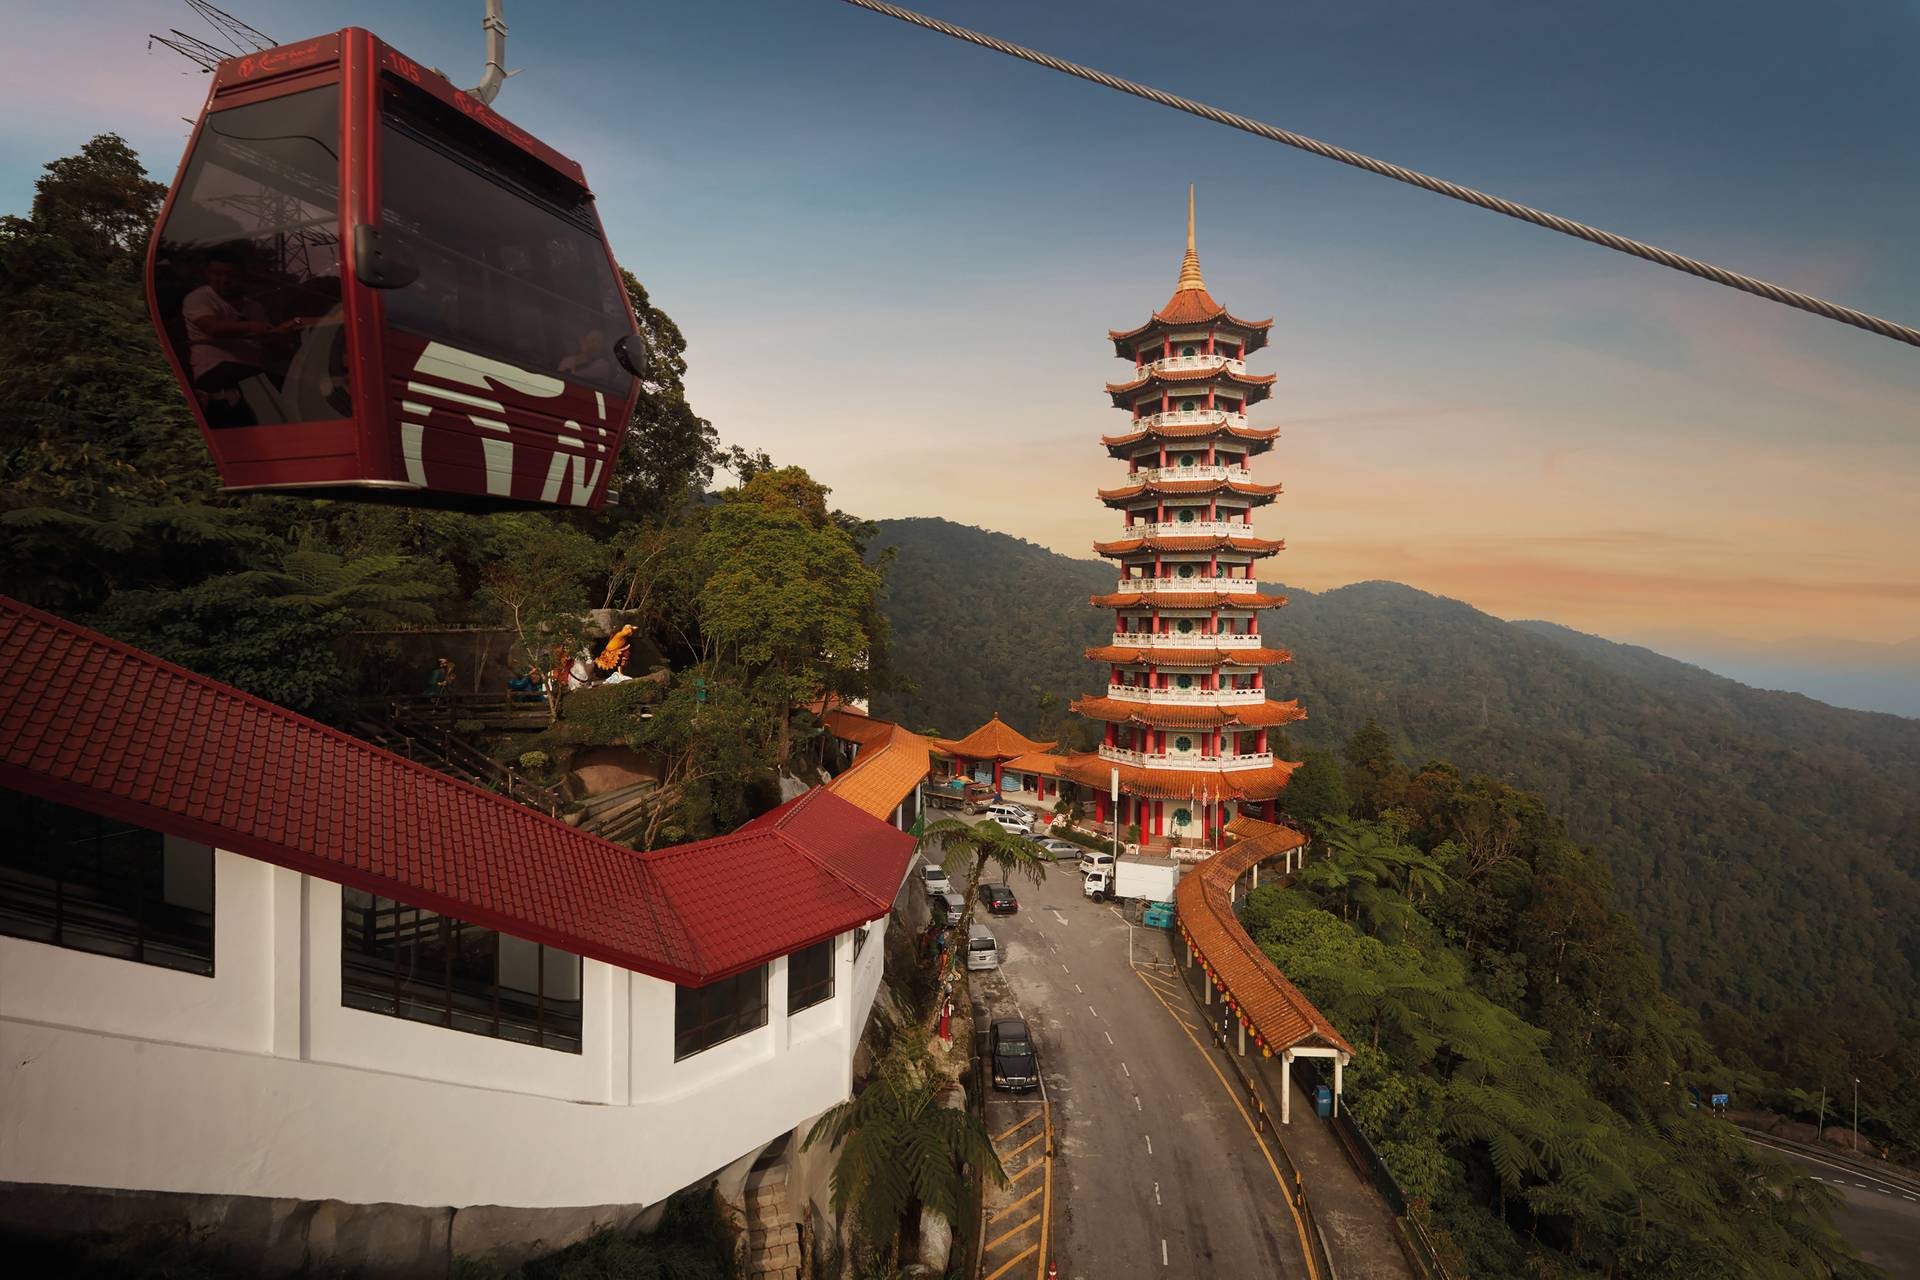 One day tour to Genting Highlands with Batu Caves from Kuala Lumpur